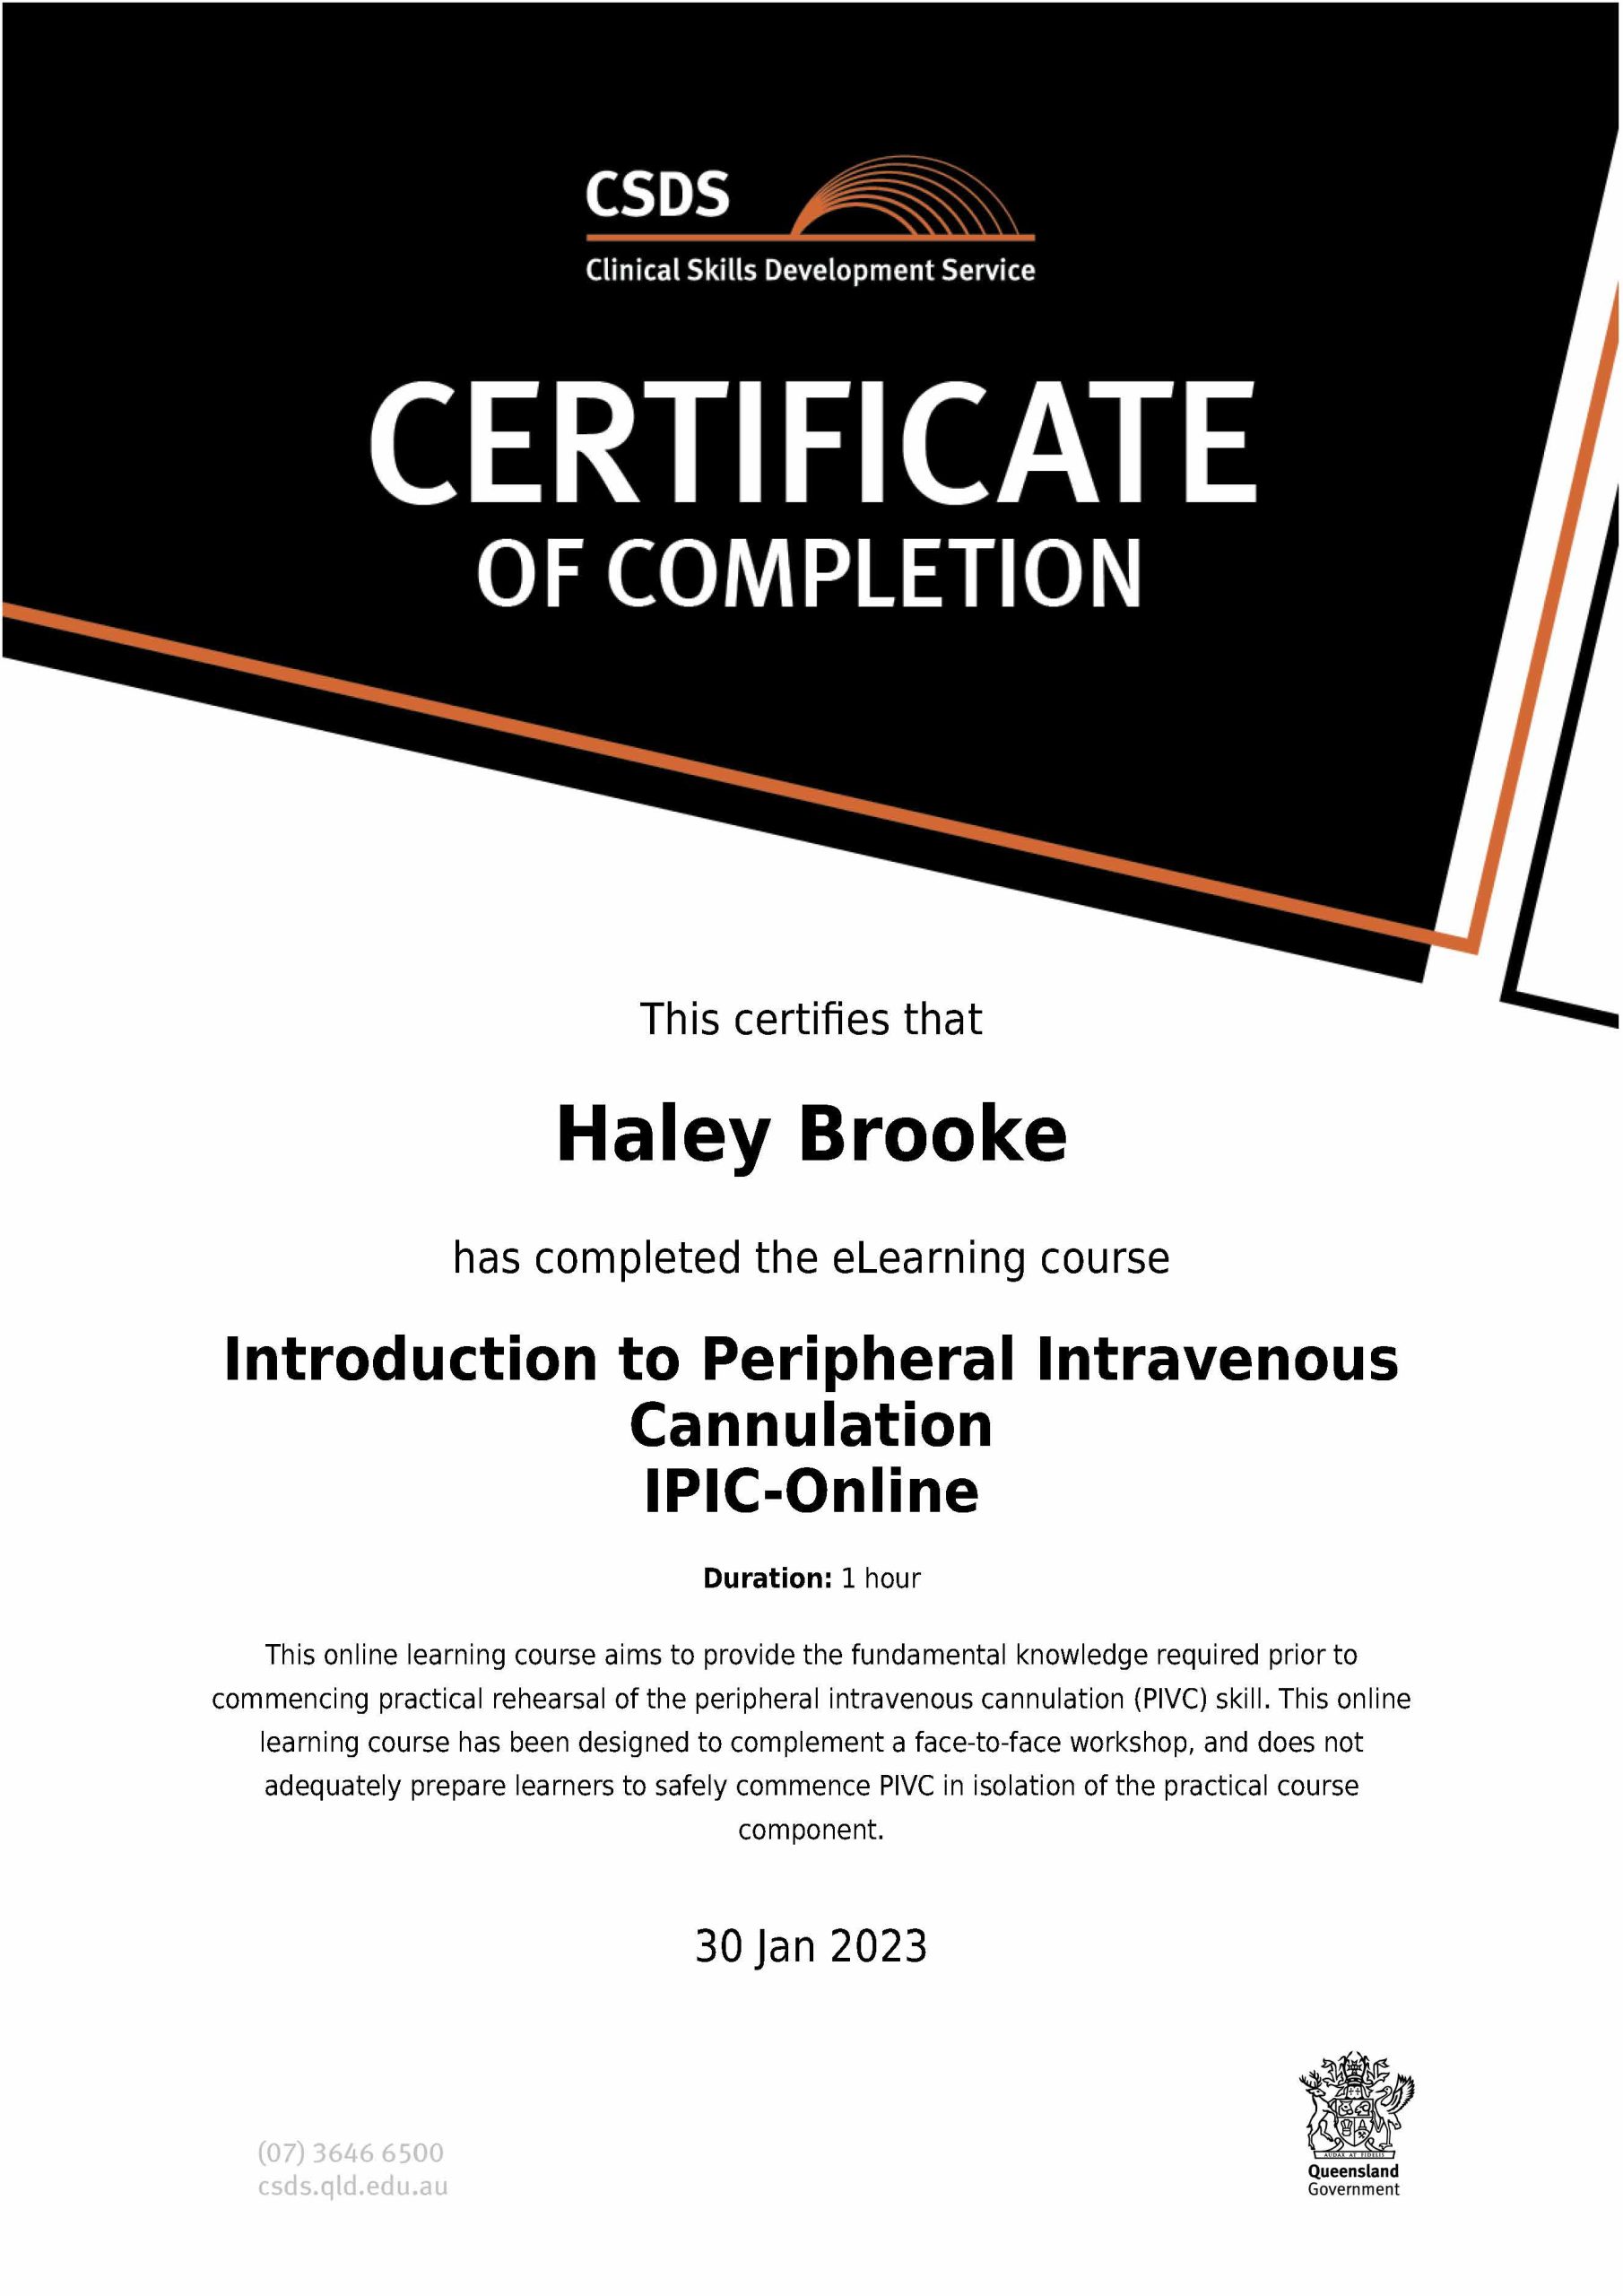 introduction to peripheral intraveous cannulation certificate haley brooke